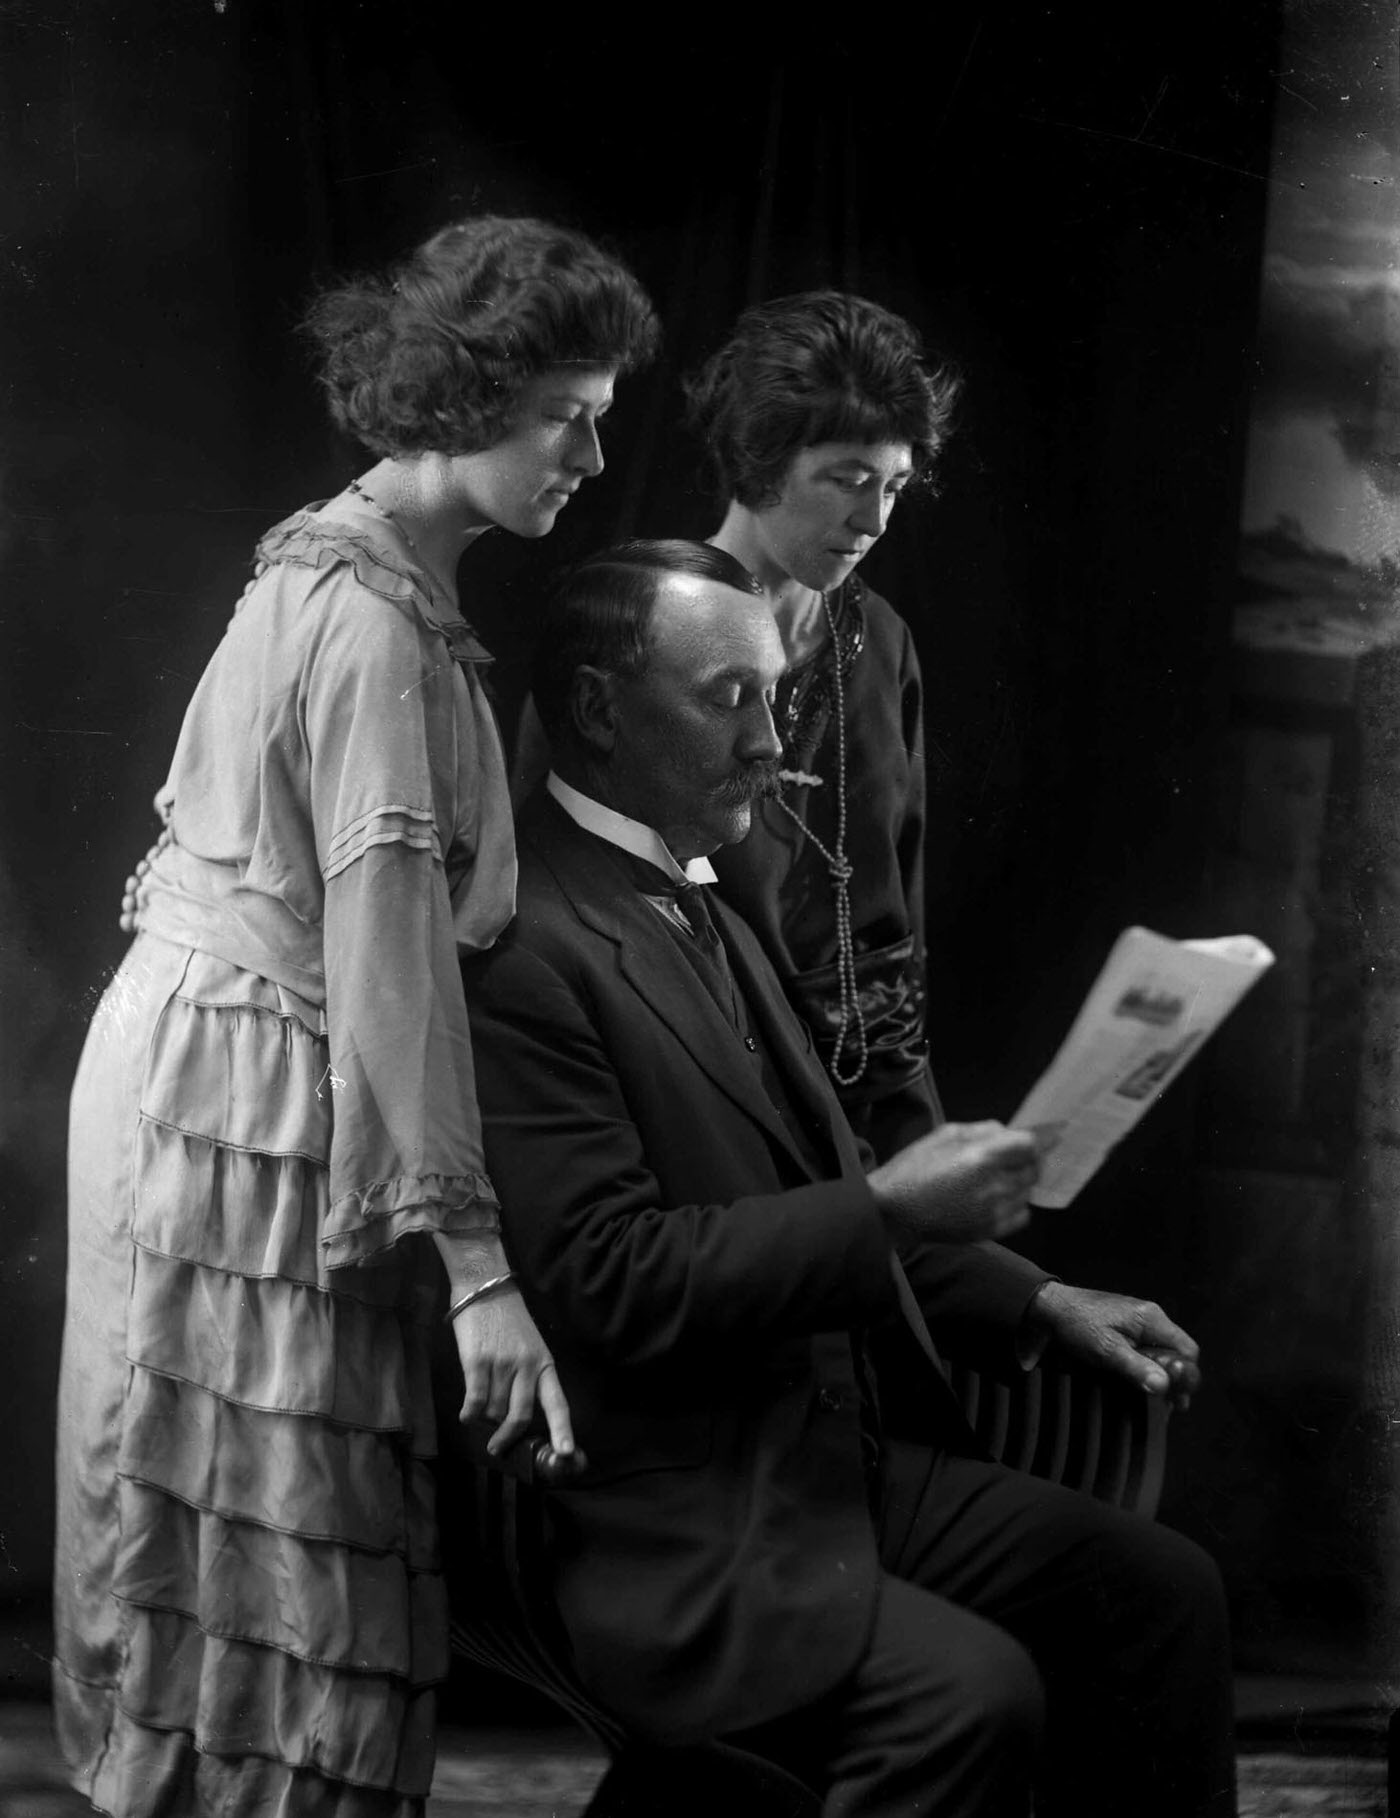 Group portrait featuring two ladies and a man reading a paper